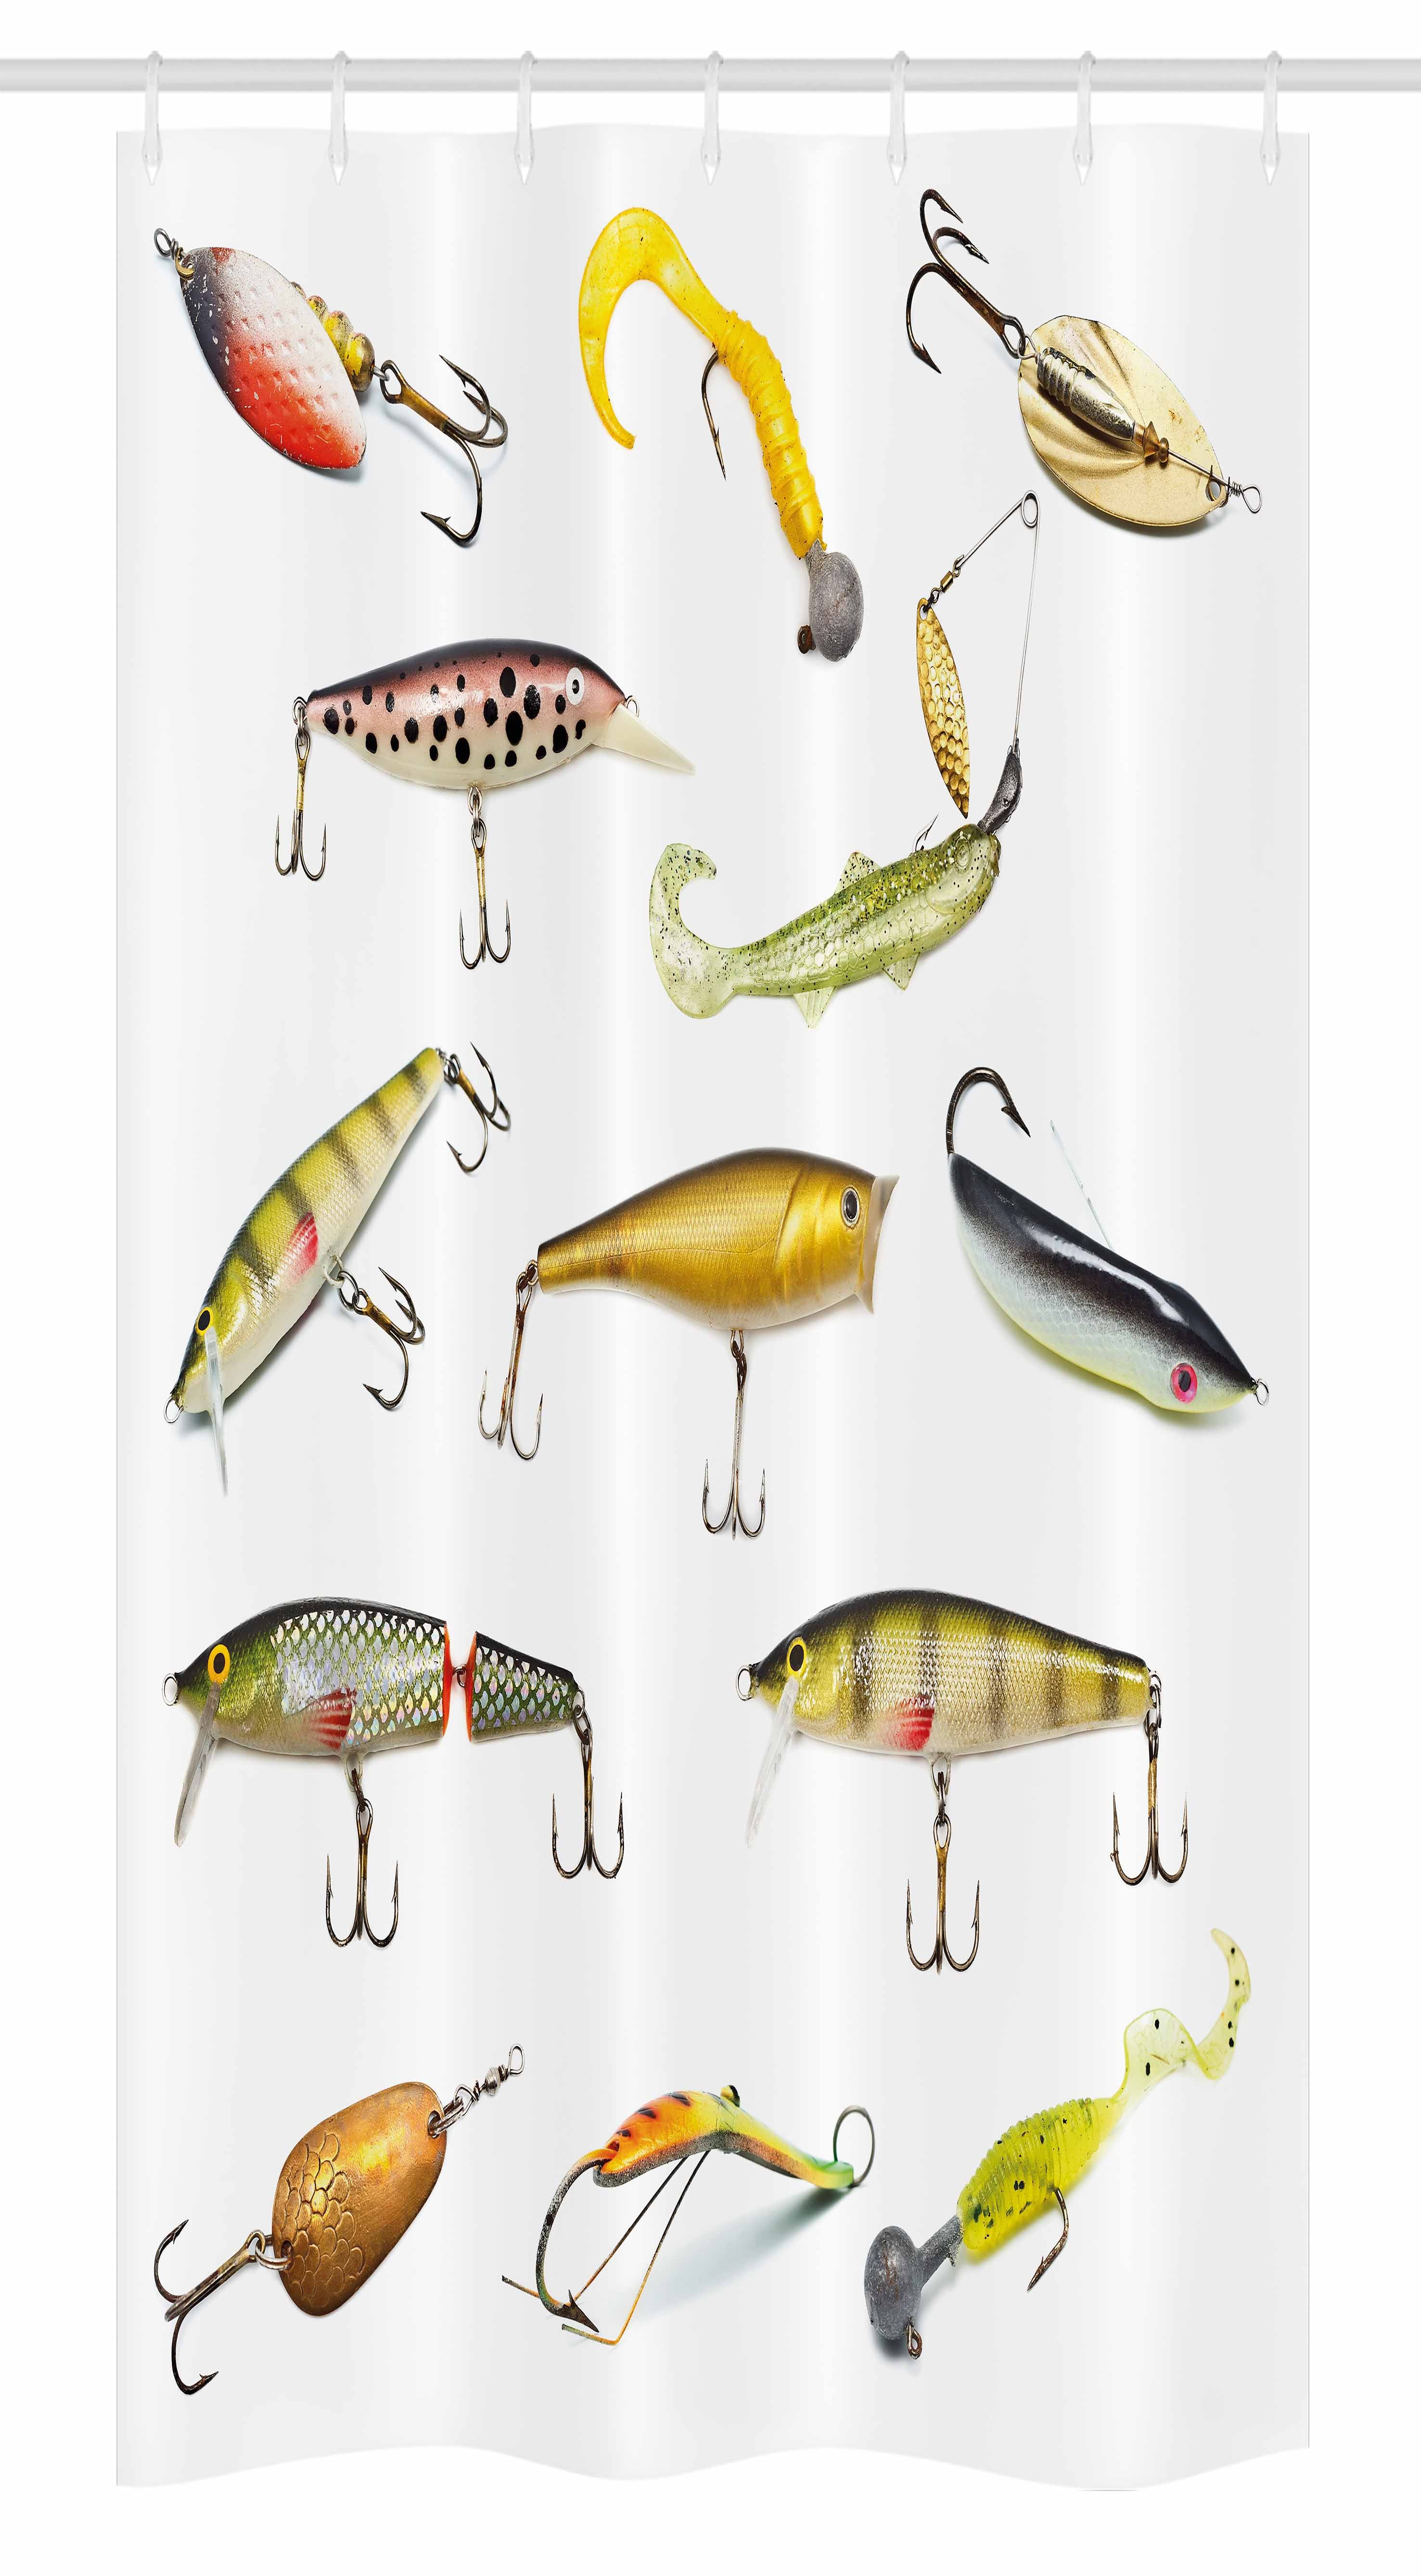 Fishing Lures Fish Tackles on Wooden Shower Curtians Bathroom Decor Waterproof 